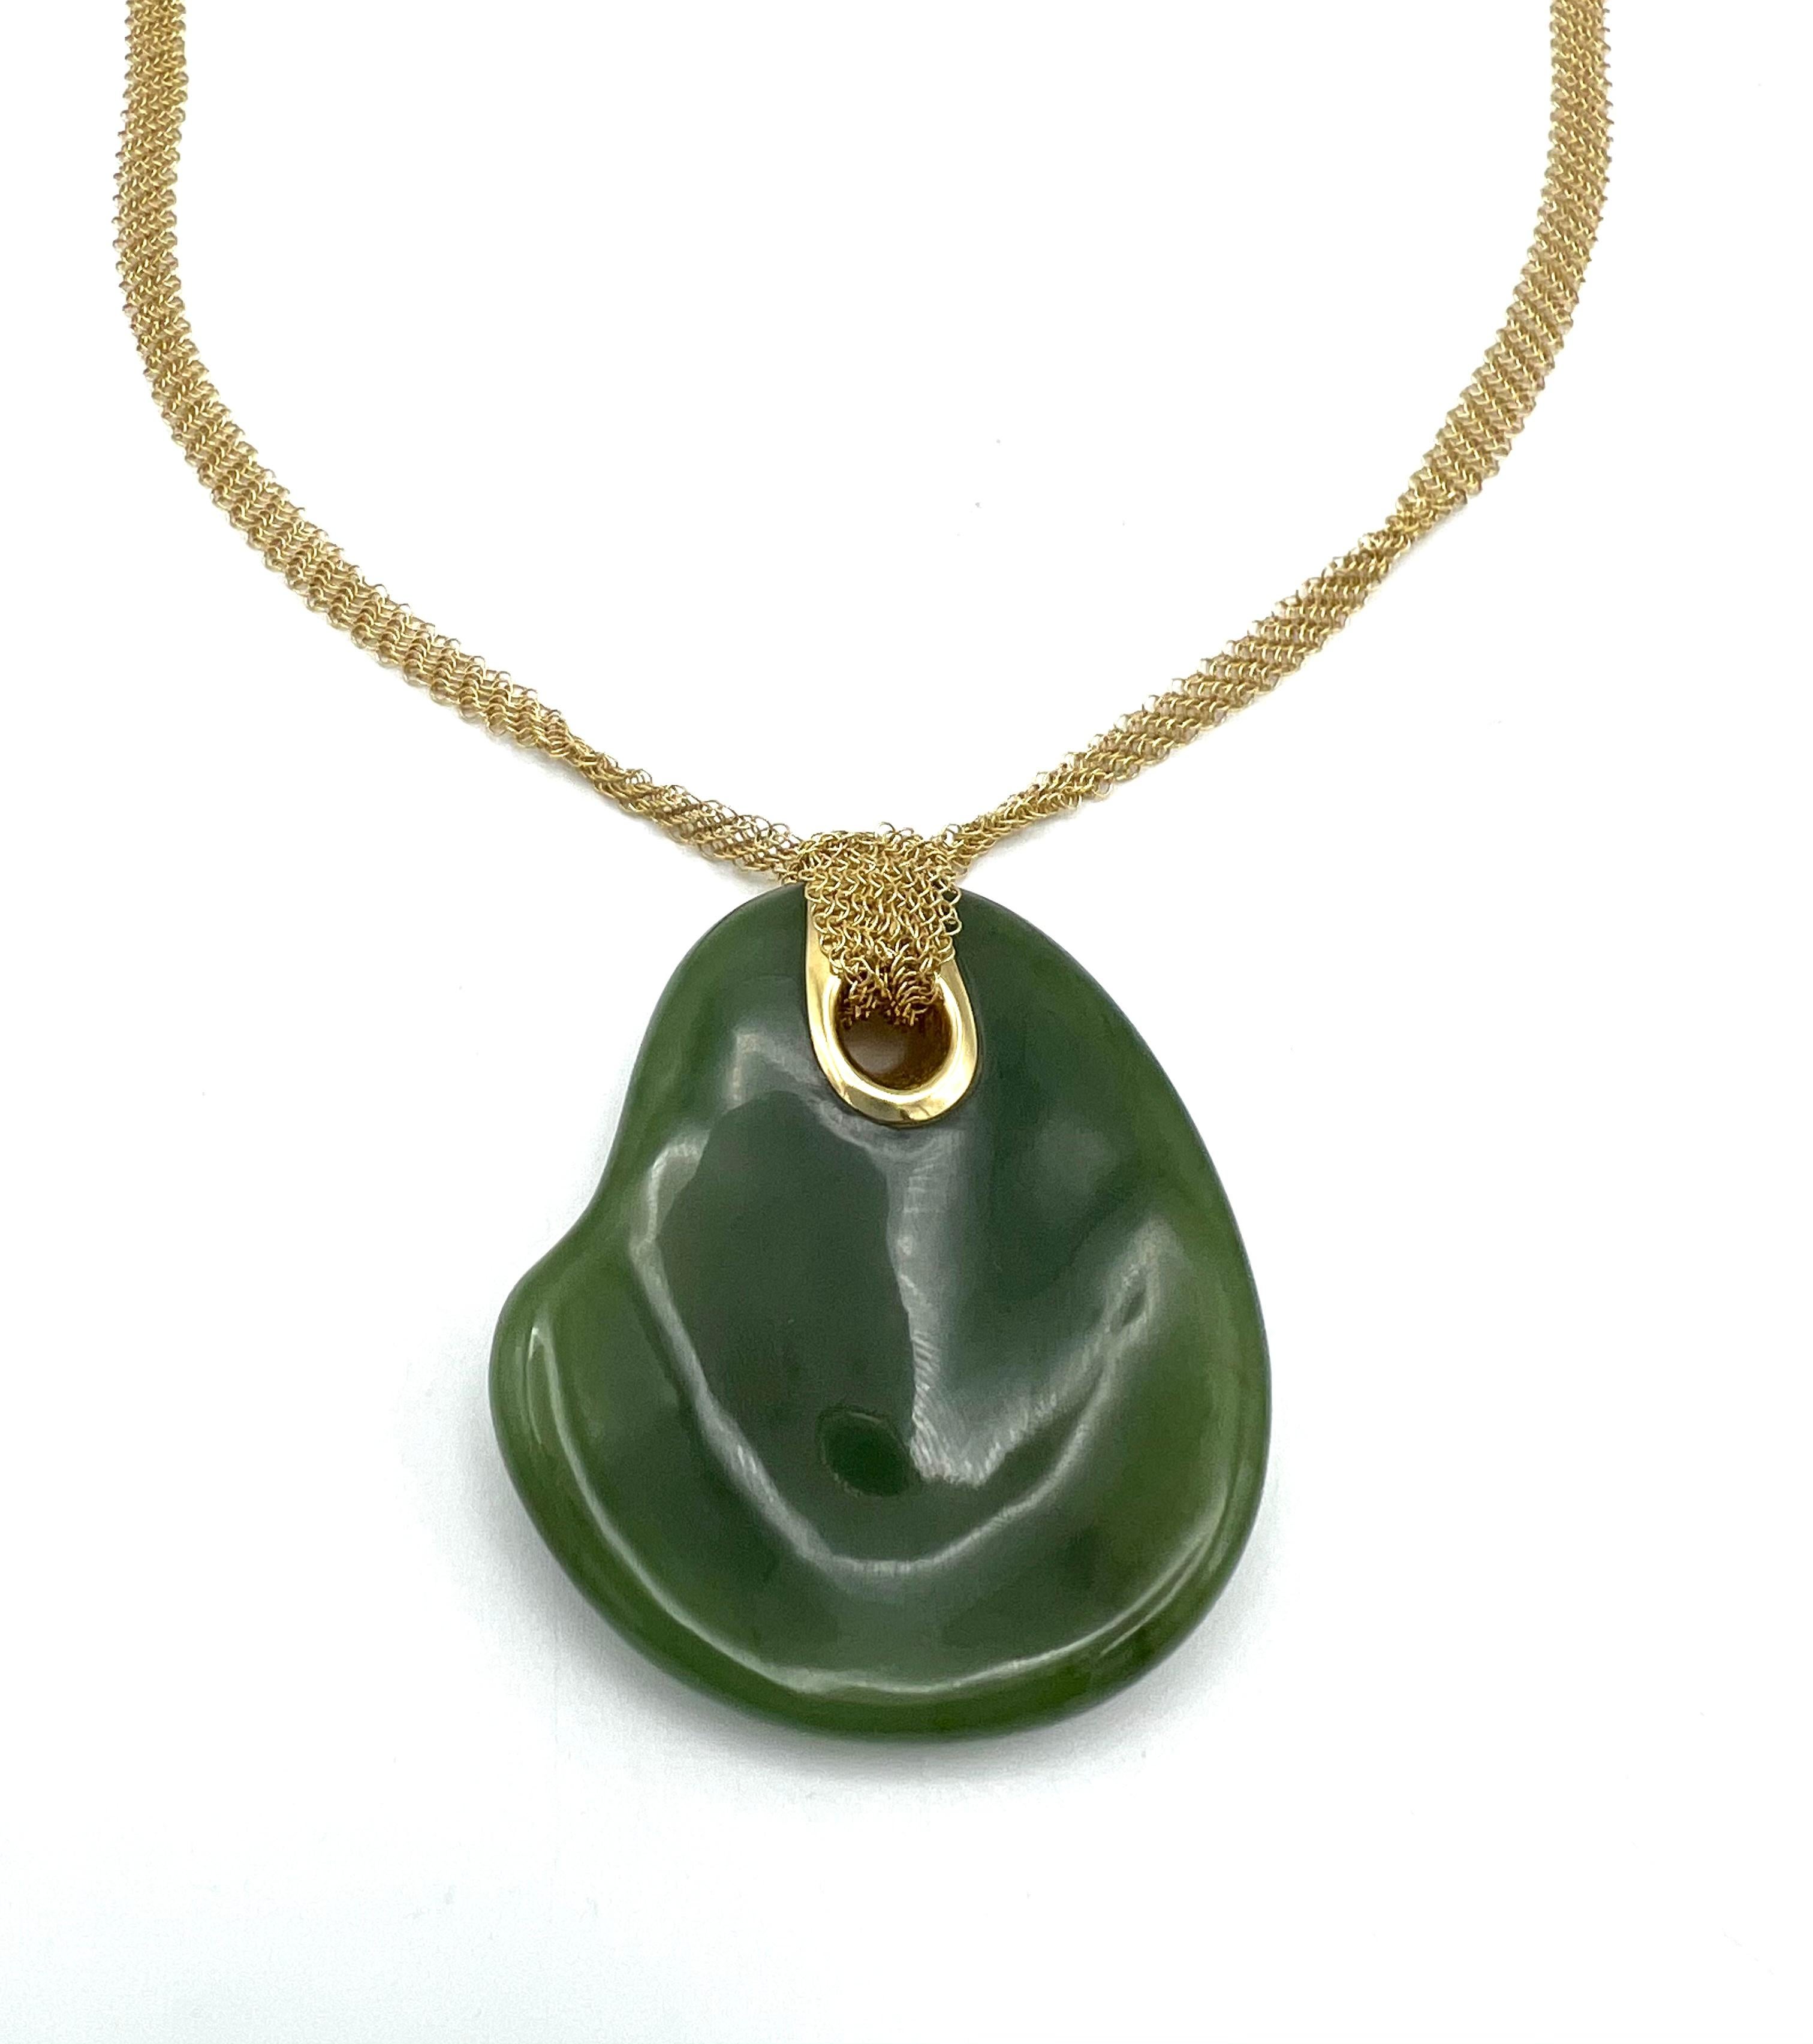 Tiffany & Co. Elsa Peretti Mesh Necklace & Green Jade Pendant
 
​
​This Tiffany & Co. Elsa Peretti Mesh necklace with a green jade pendant is a rare find.
​The Touchstone pendant is designed as a nephrite jade plaque. Once you see it, you want to